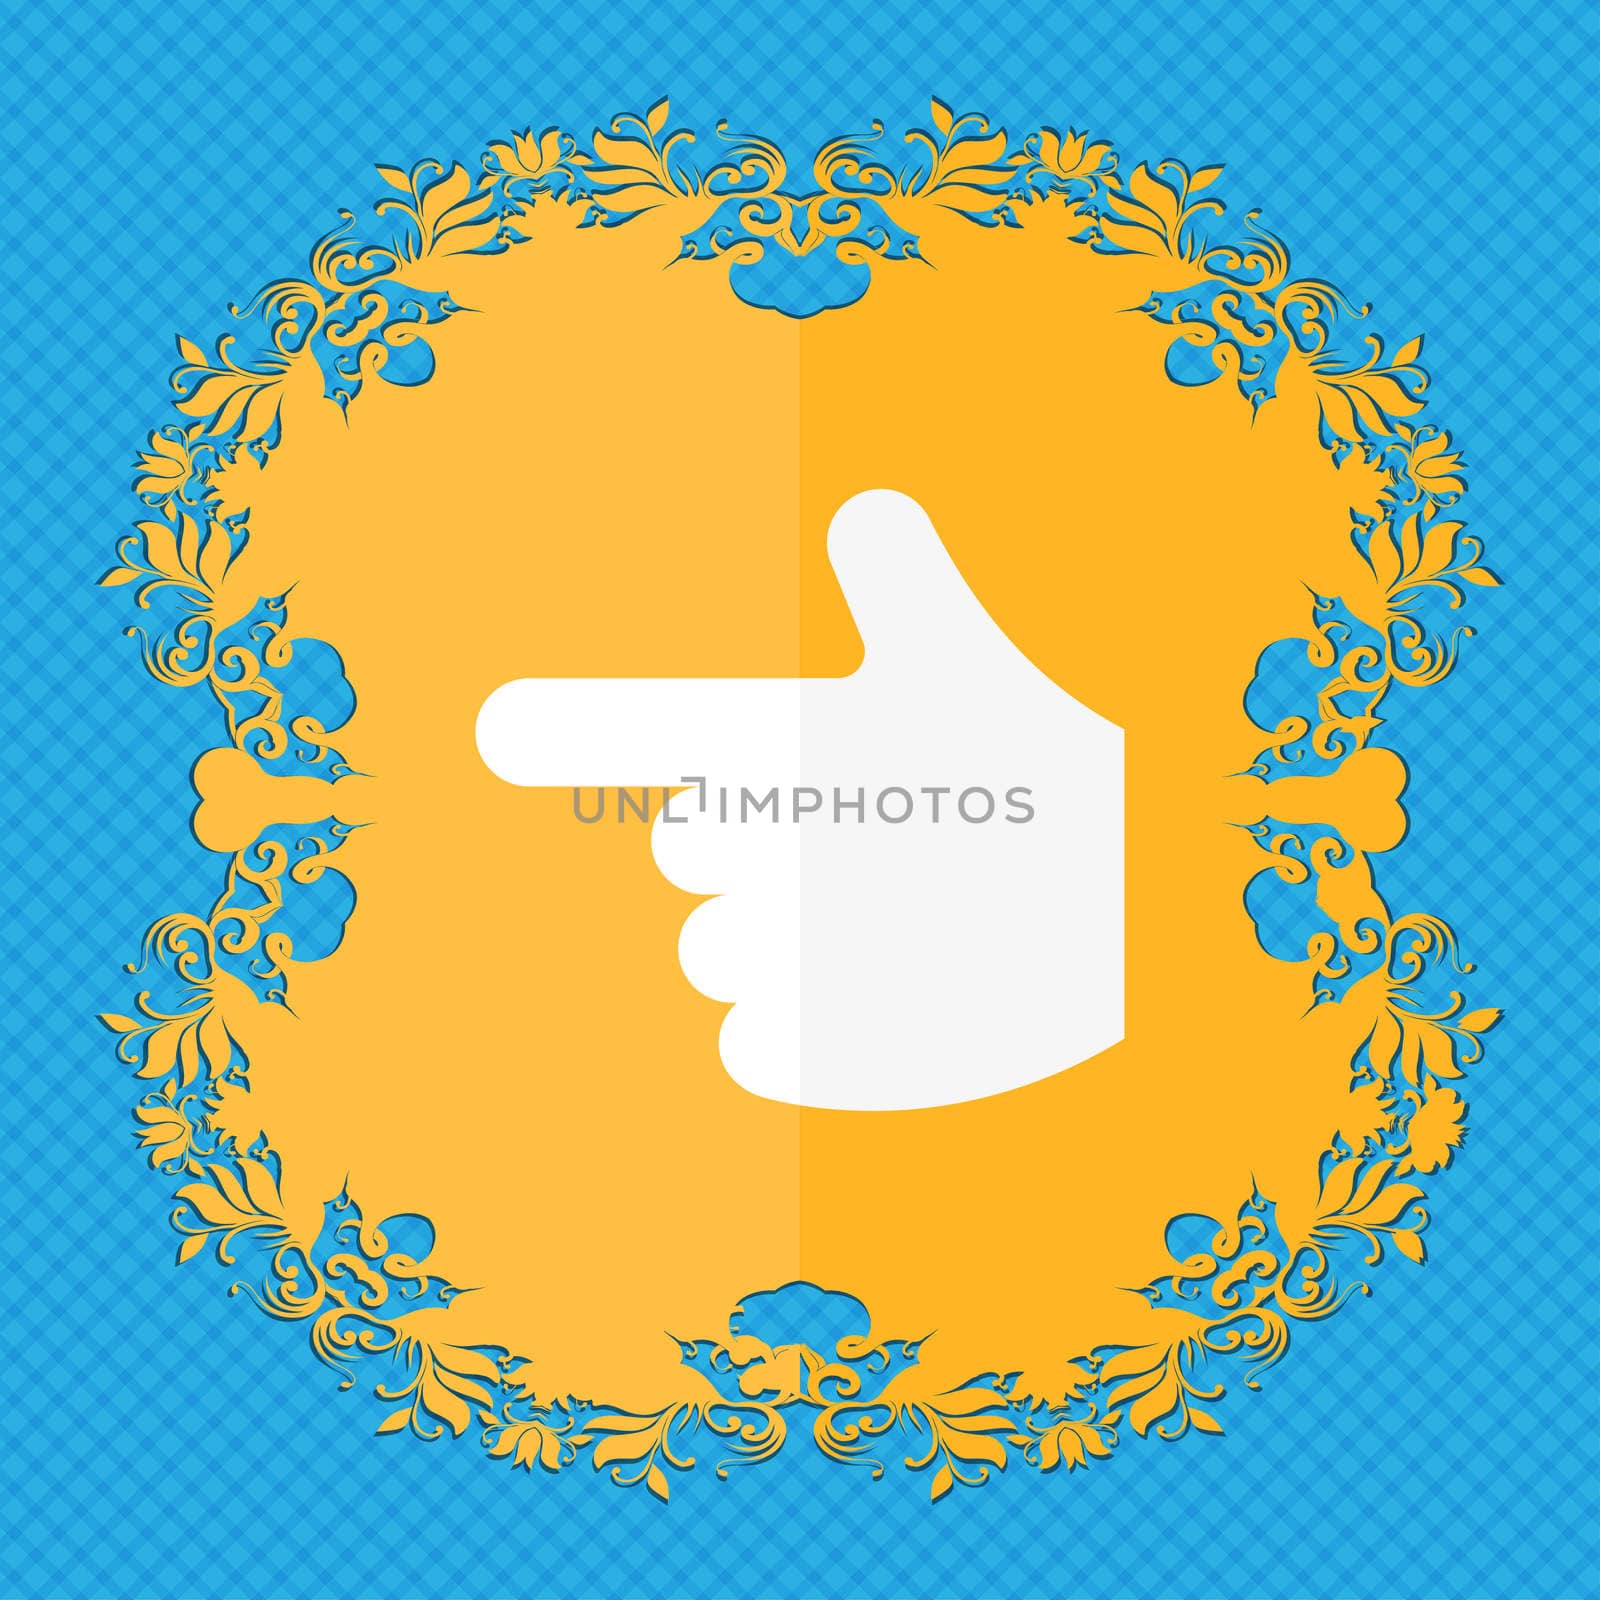 pointing hand . Floral flat design on a blue abstract background with place for your text. illustration